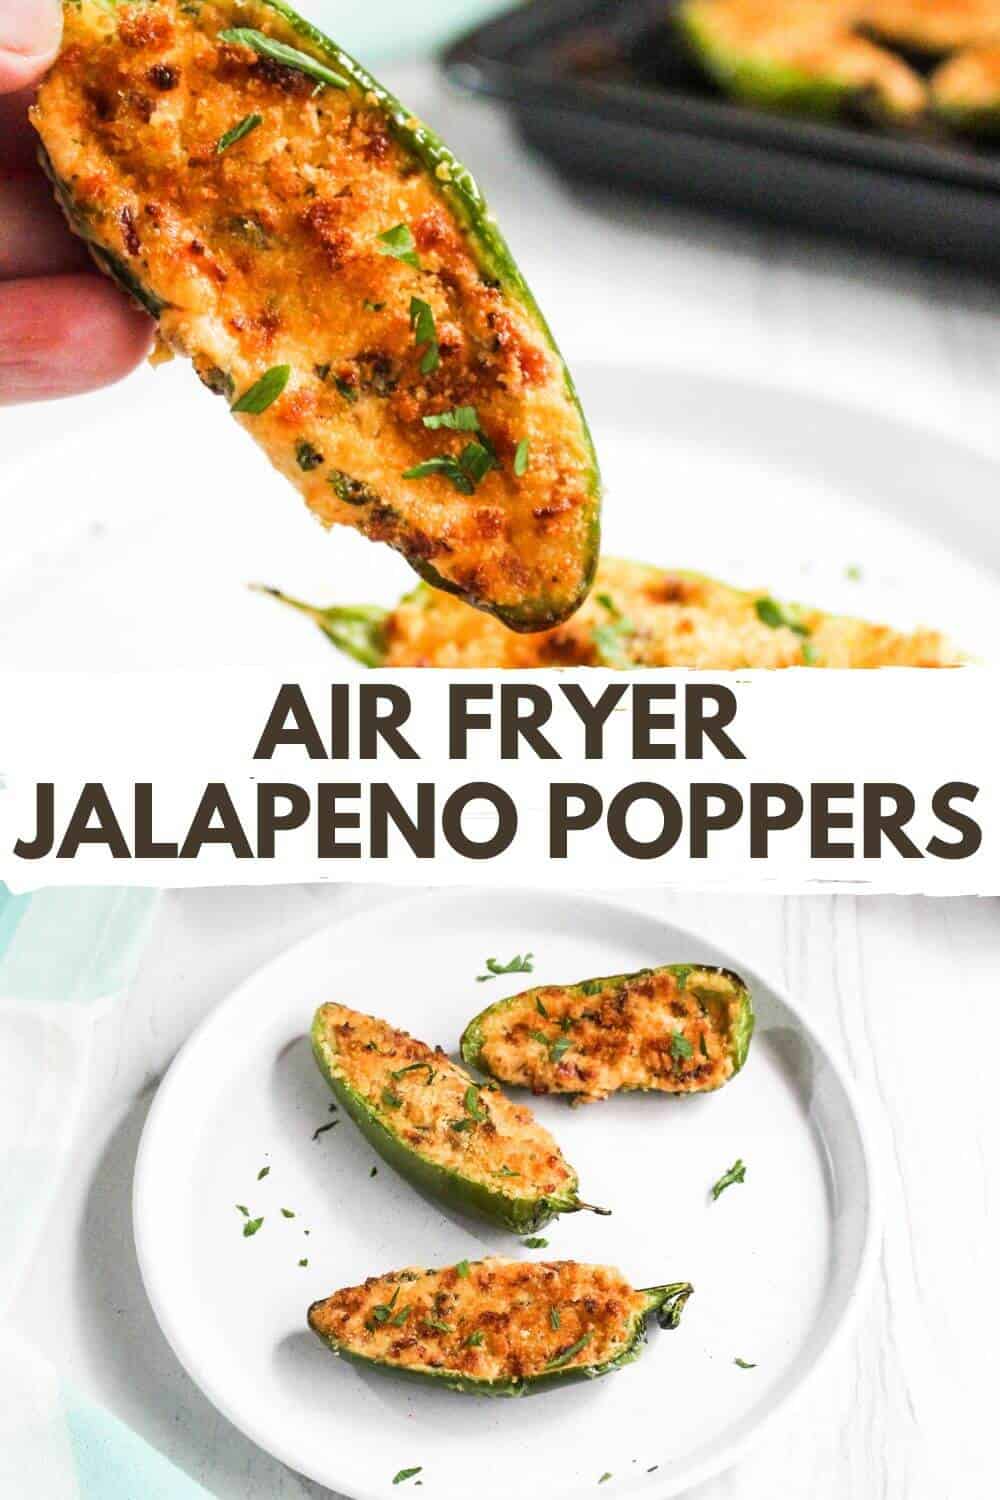 Air fryer jalapeño poppers with recipe title text.